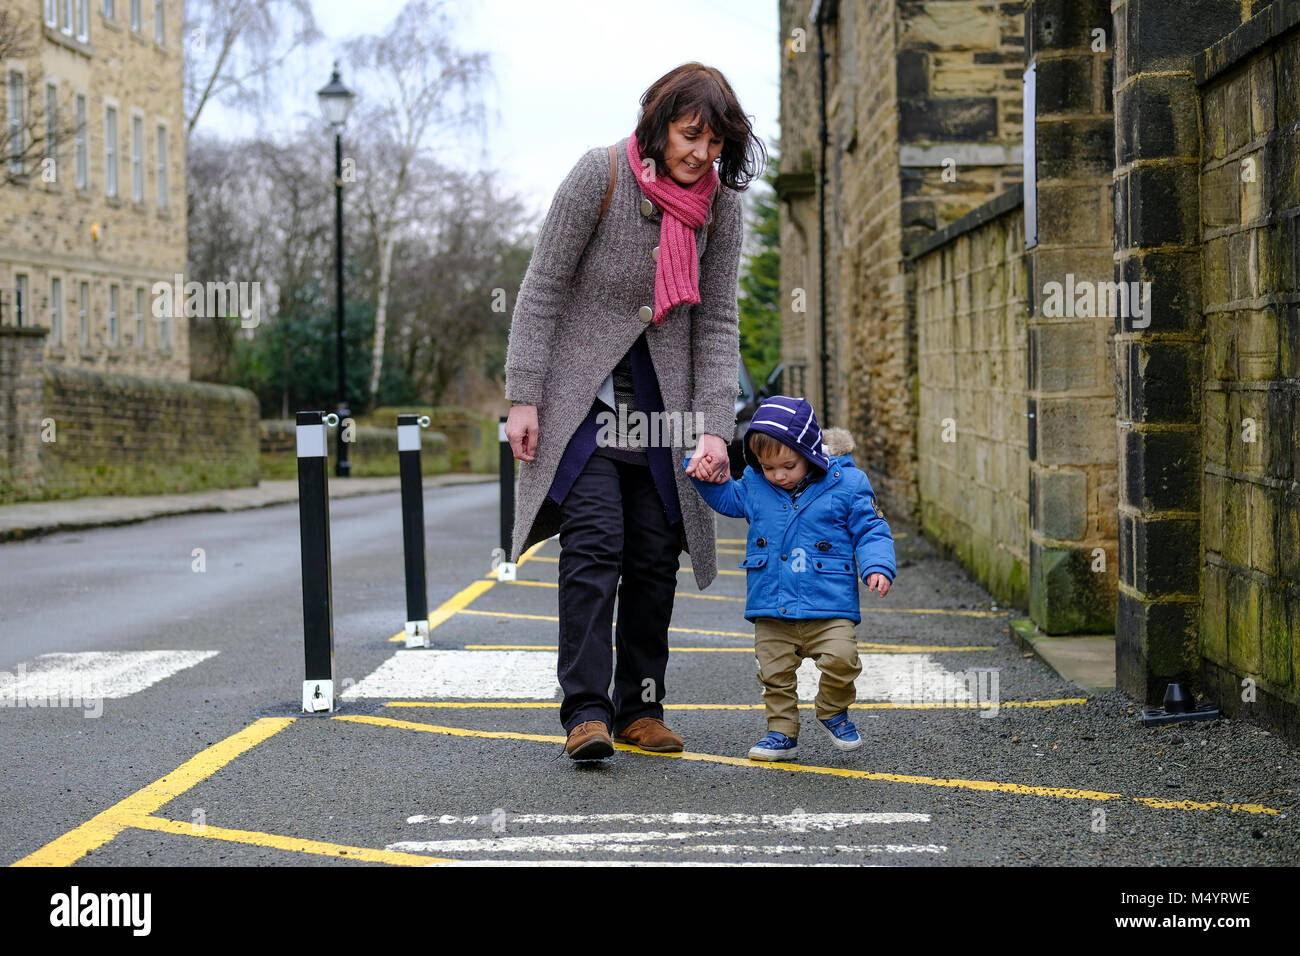 Toddler holding hands with grandparent and walking outside Stock Photo